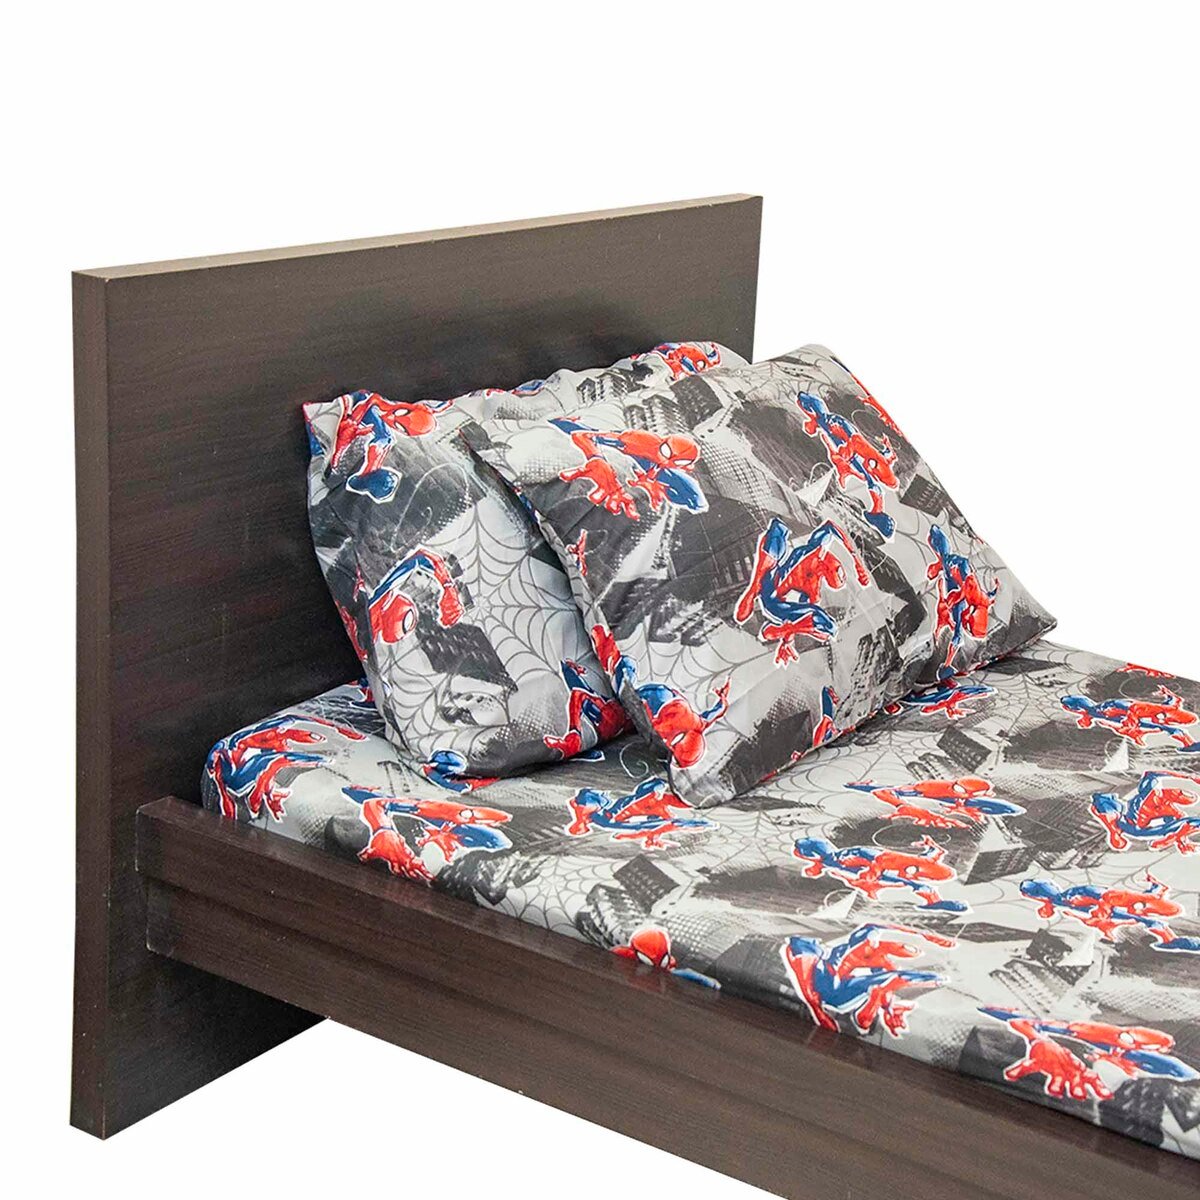 Marvel Spiderman Fitted Bed Sheet for Kids -Super Soft, Fade Resistant (Official Marvel Product) 90x190+25cm RHA11981